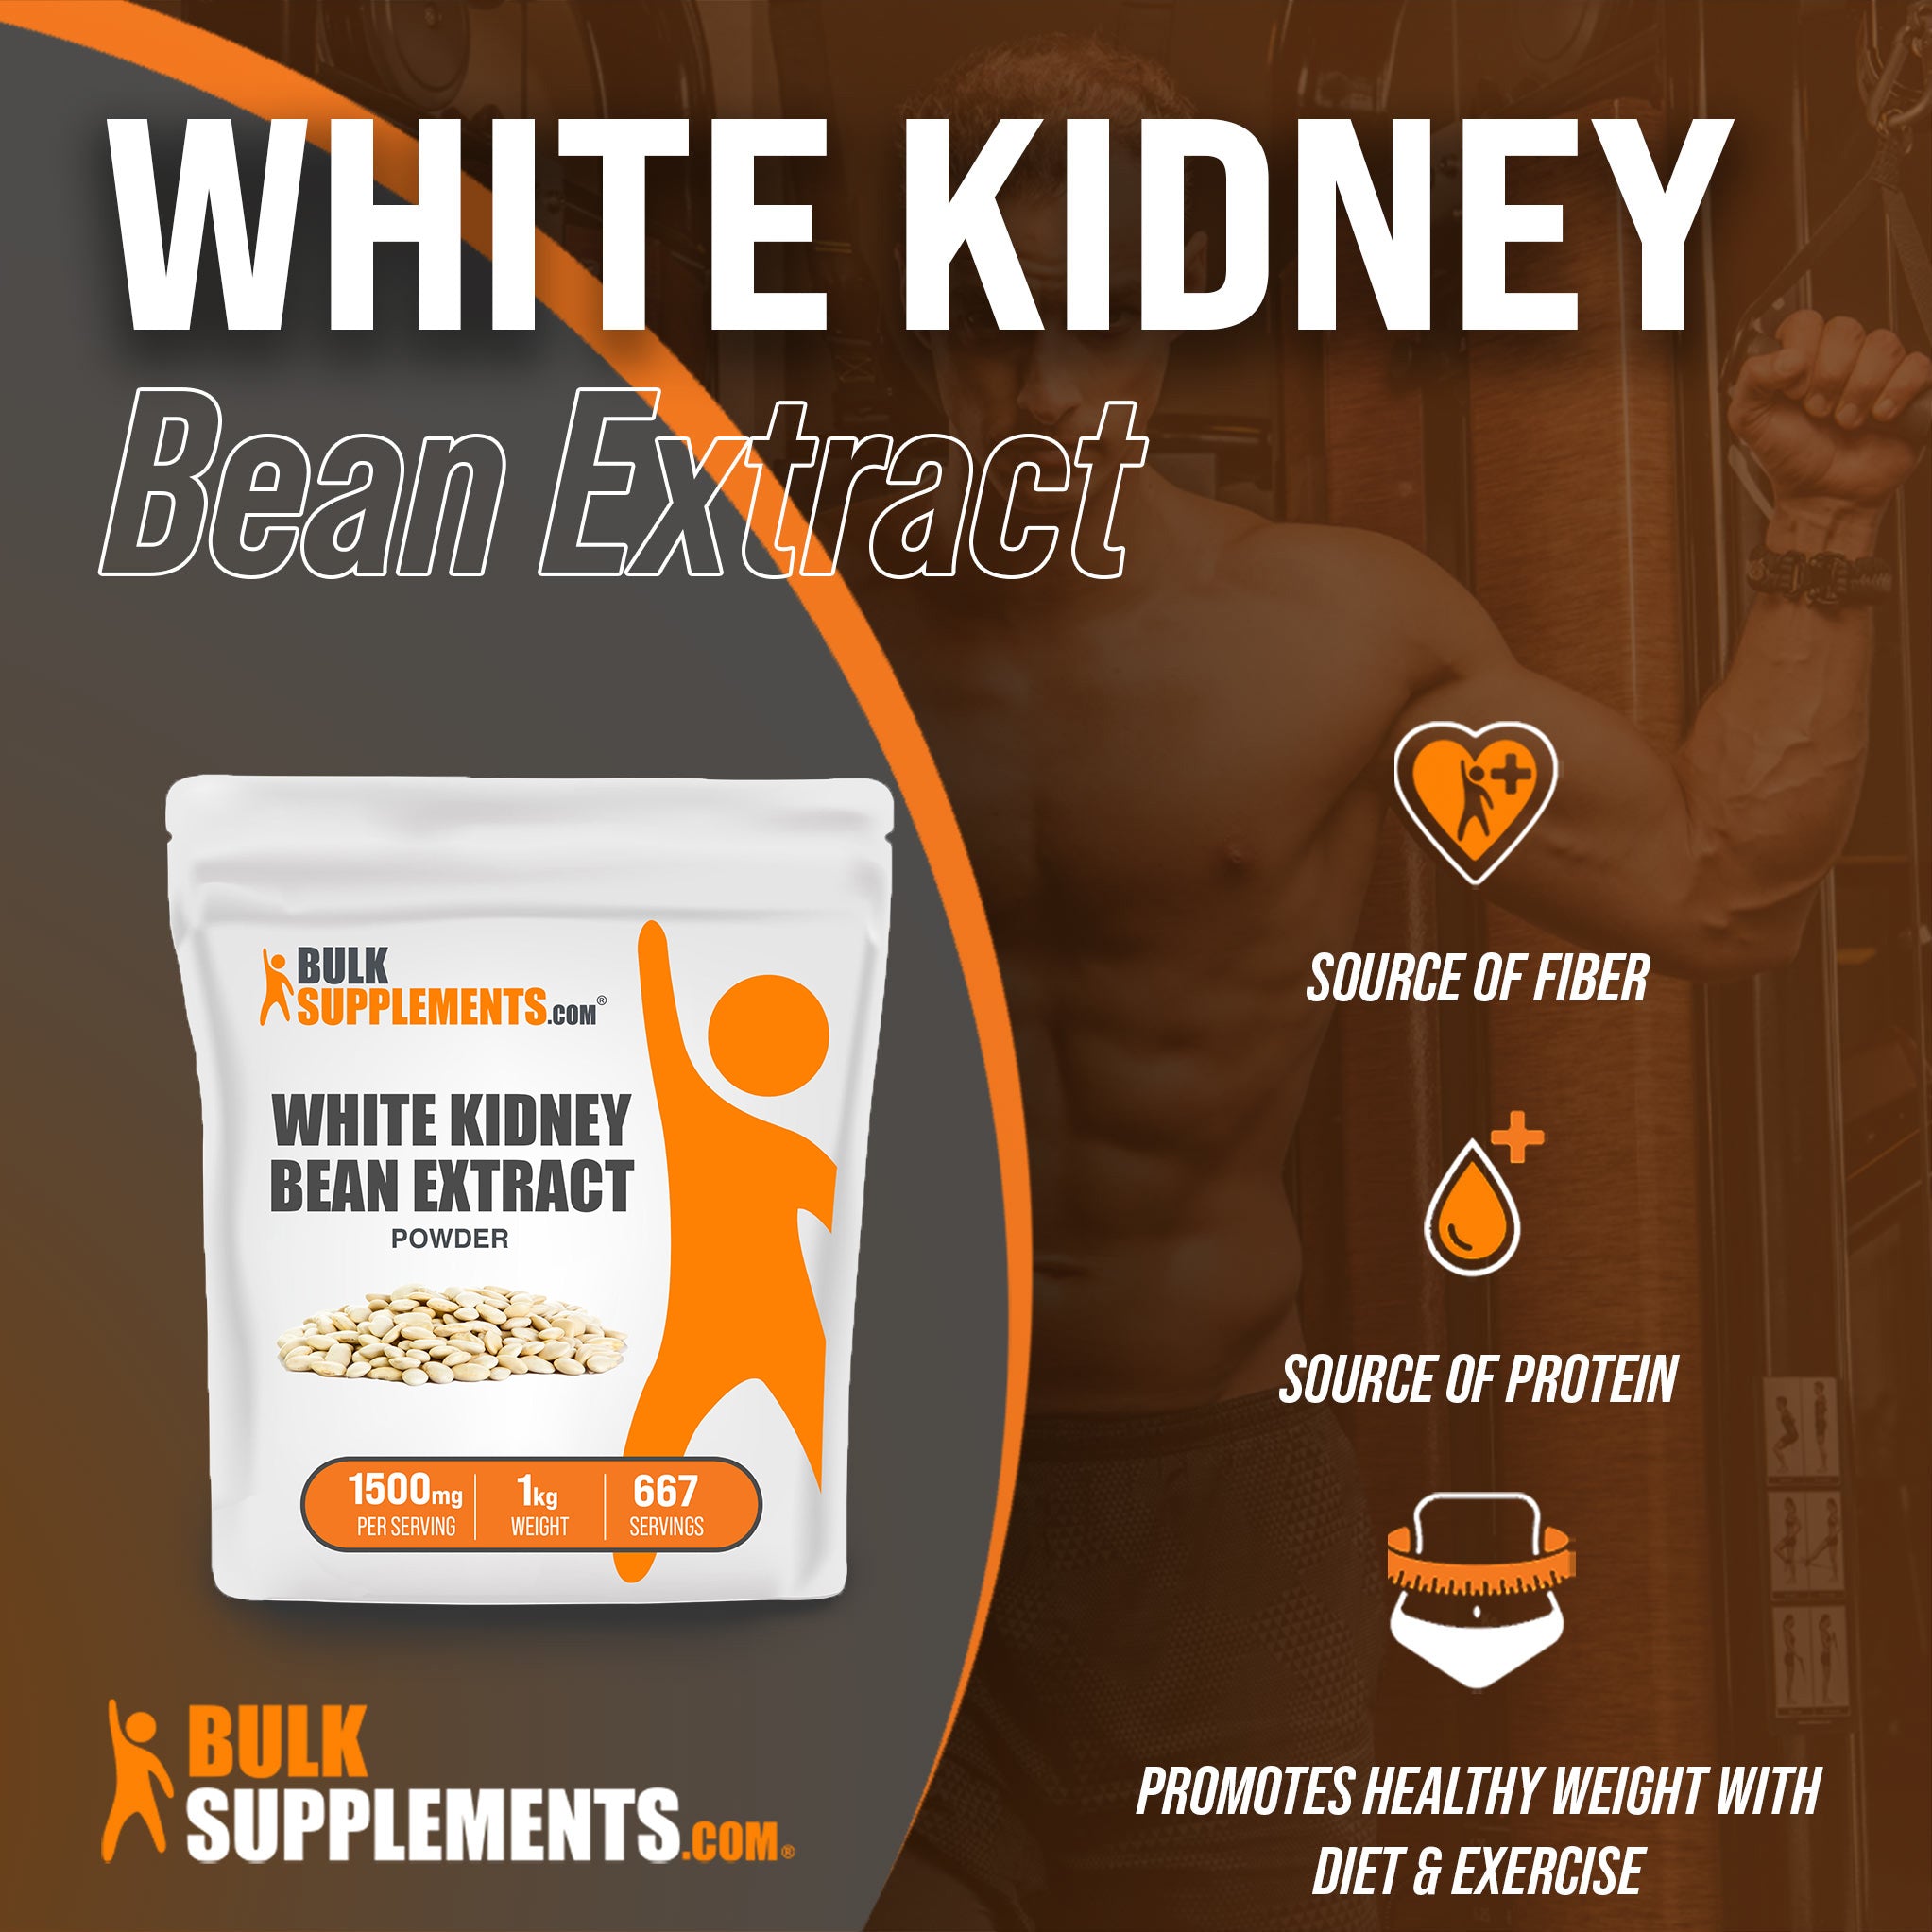 Benefits of White Kidney Bean Extract: source of fiber, source of protein, promotes healthy weight with diet and exercise